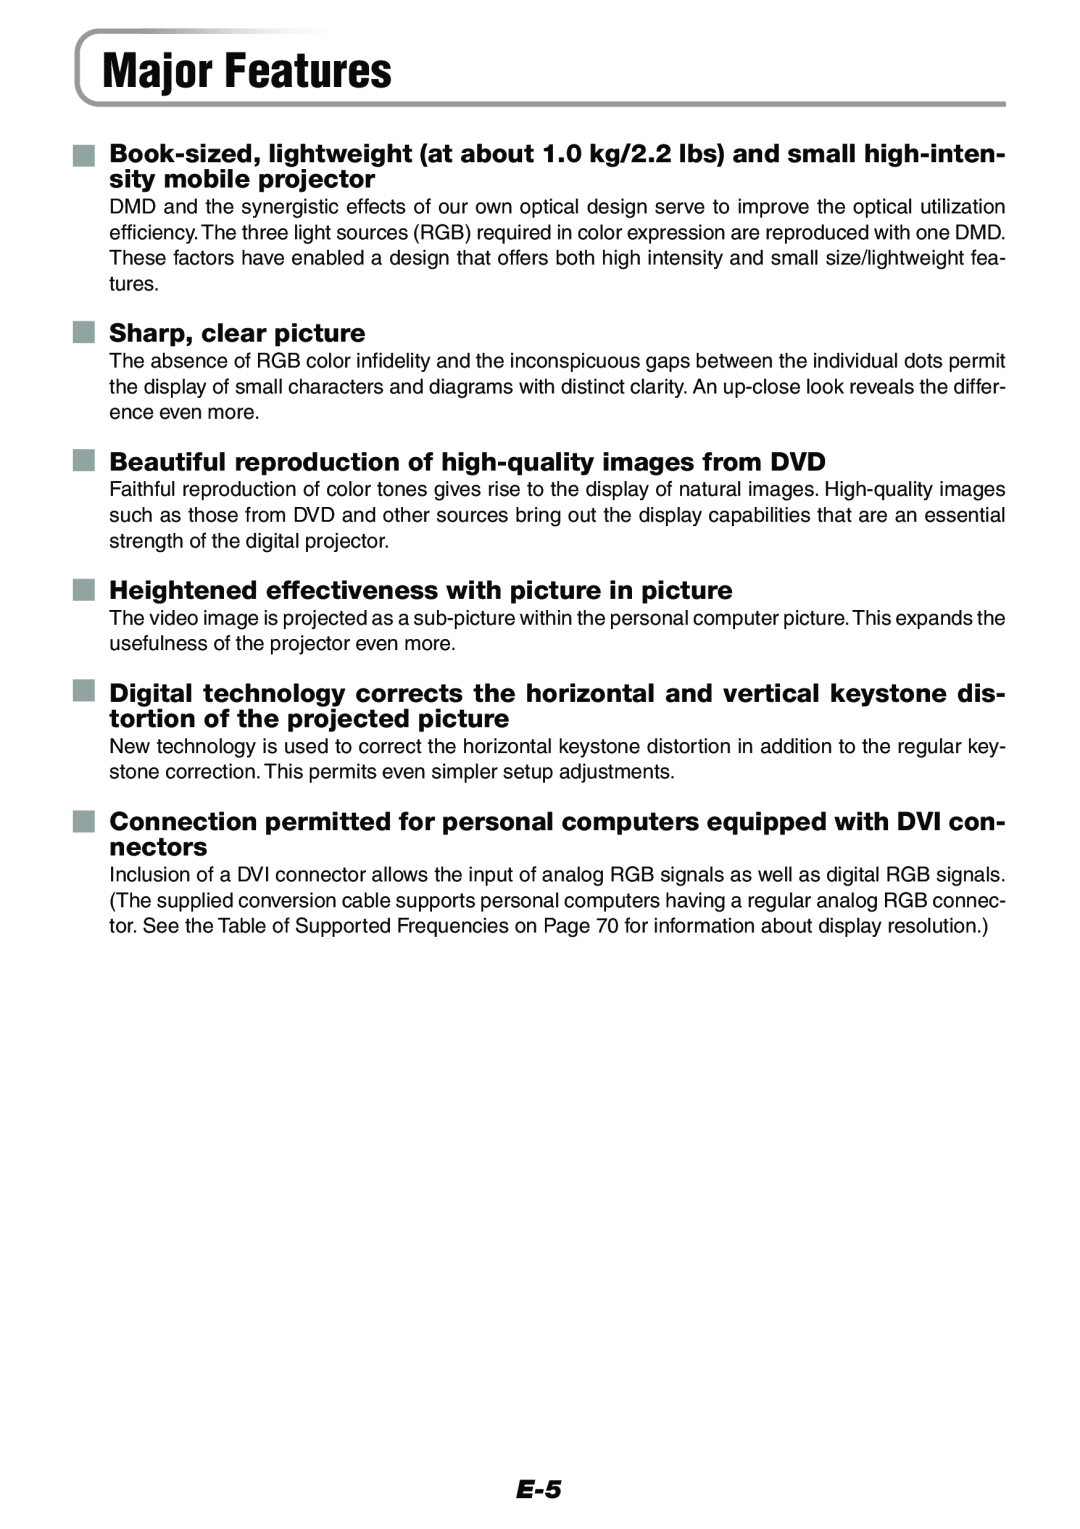 Epson V-1100 user manual Major Features, Sharp, clear picture, Heightened effectiveness with picture in picture 